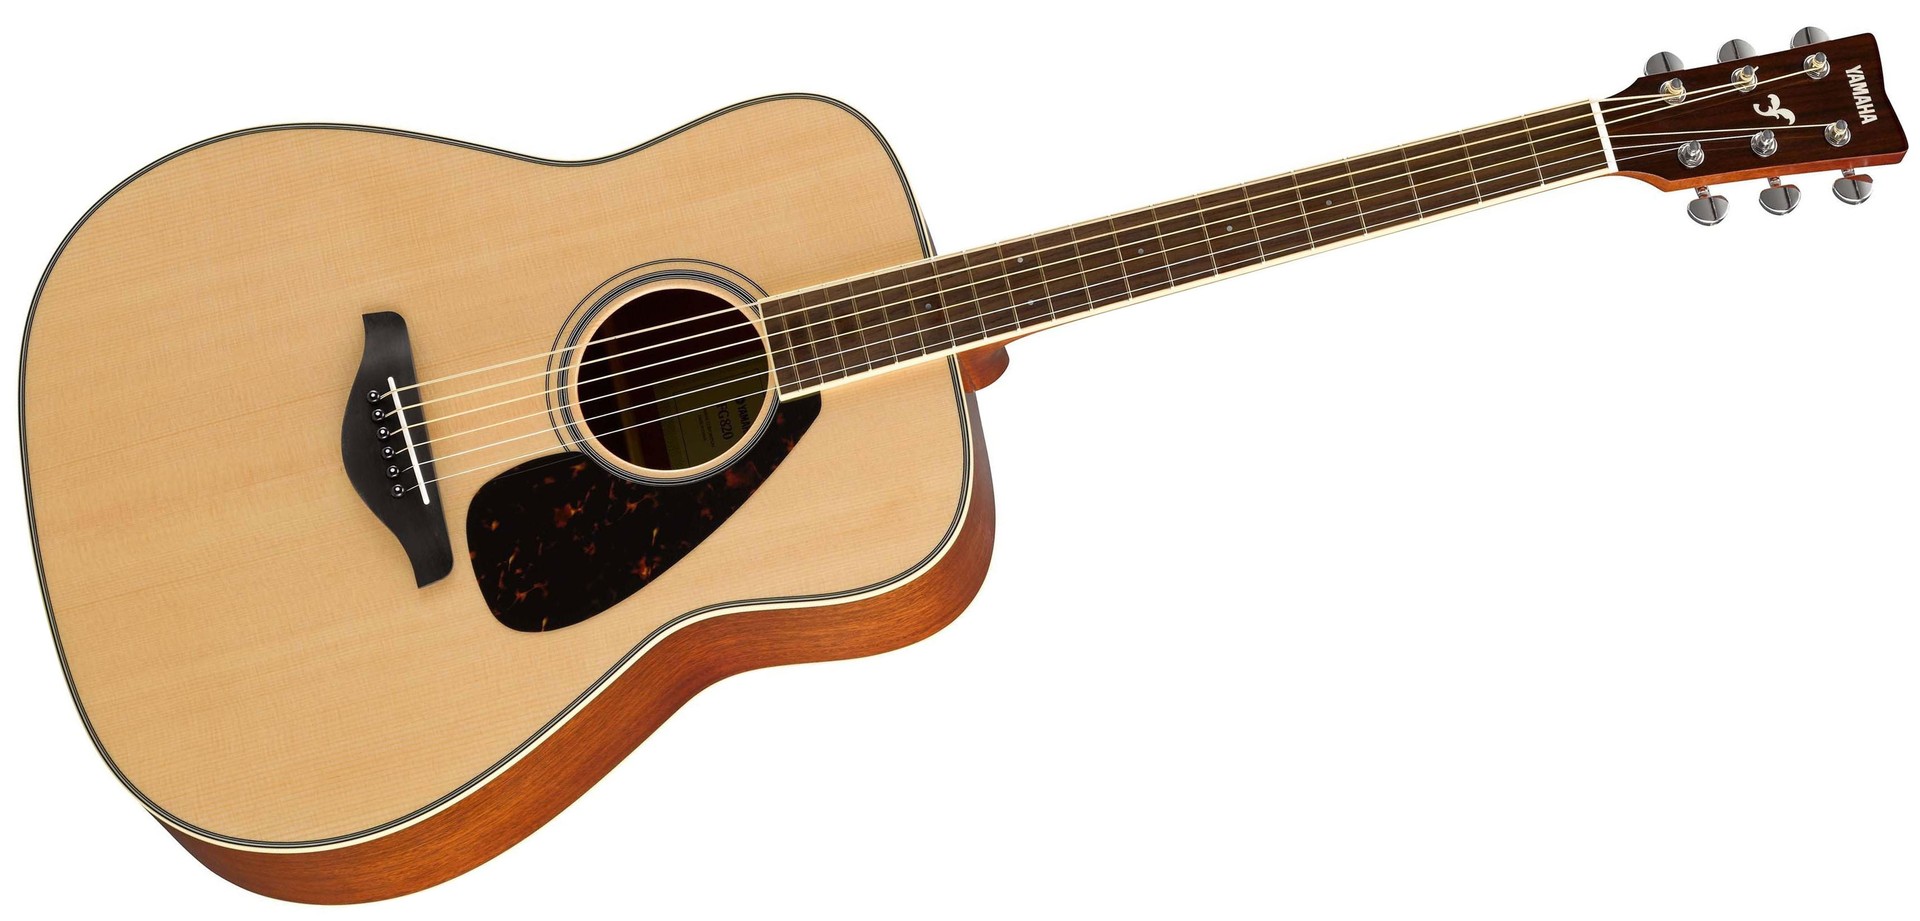 Review of the Yamaha FG-820 guitar. Features and Specs